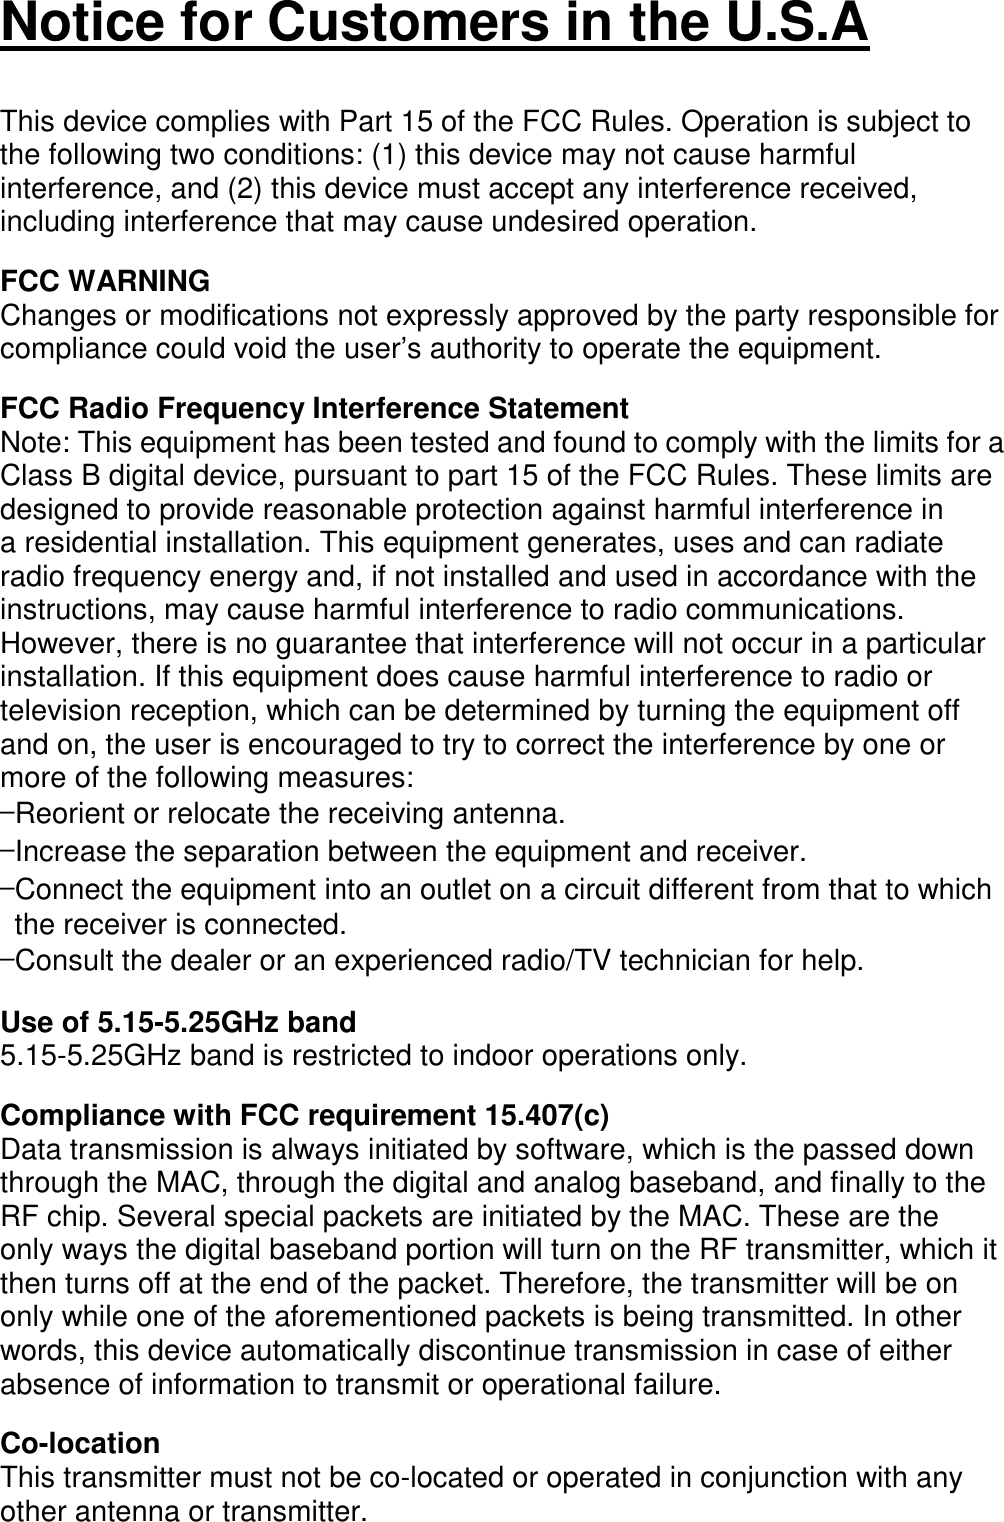   Notice for Customers in the U.S.A   This device complies with Part 15 of the FCC Rules. Operation is subject to the following two conditions: (1) this device may not cause harmful interference, and (2) this device must accept any interference received, including interference that may cause undesired operation.  FCC WARNING Changes or modifications not expressly approved by the party responsible for compliance could void the user’s authority to operate the equipment.  FCC Radio Frequency Interference Statement Note: This equipment has been tested and found to comply with the limits for a Class B digital device, pursuant to part 15 of the FCC Rules. These limits are designed to provide reasonable protection against harmful interference in a residential installation. This equipment generates, uses and can radiate radio frequency energy and, if not installed and used in accordance with the instructions, may cause harmful interference to radio communications. However, there is no guarantee that interference will not occur in a particular installation. If this equipment does cause harmful interference to radio or television reception, which can be determined by turning the equipment off and on, the user is encouraged to try to correct the interference by one or more of the following measures: —Reorient or relocate the receiving antenna. —Increase the separation between the equipment and receiver. —Connect the equipment into an outlet on a circuit different from that to which the receiver is connected. —Consult the dealer or an experienced radio/TV technician for help.  Use of 5.15-5.25GHz band 5.15-5.25GHz band is restricted to indoor operations only.  Compliance with FCC requirement 15.407(c) Data transmission is always initiated by software, which is the passed down through the MAC, through the digital and analog baseband, and finally to the RF chip. Several special packets are initiated by the MAC. These are the only ways the digital baseband portion will turn on the RF transmitter, which it then turns off at the end of the packet. Therefore, the transmitter will be on only while one of the aforementioned packets is being transmitted. In other words, this device automatically discontinue transmission in case of either absence of information to transmit or operational failure.  Co-location This transmitter must not be co-located or operated in conjunction with any other antenna or transmitter.  